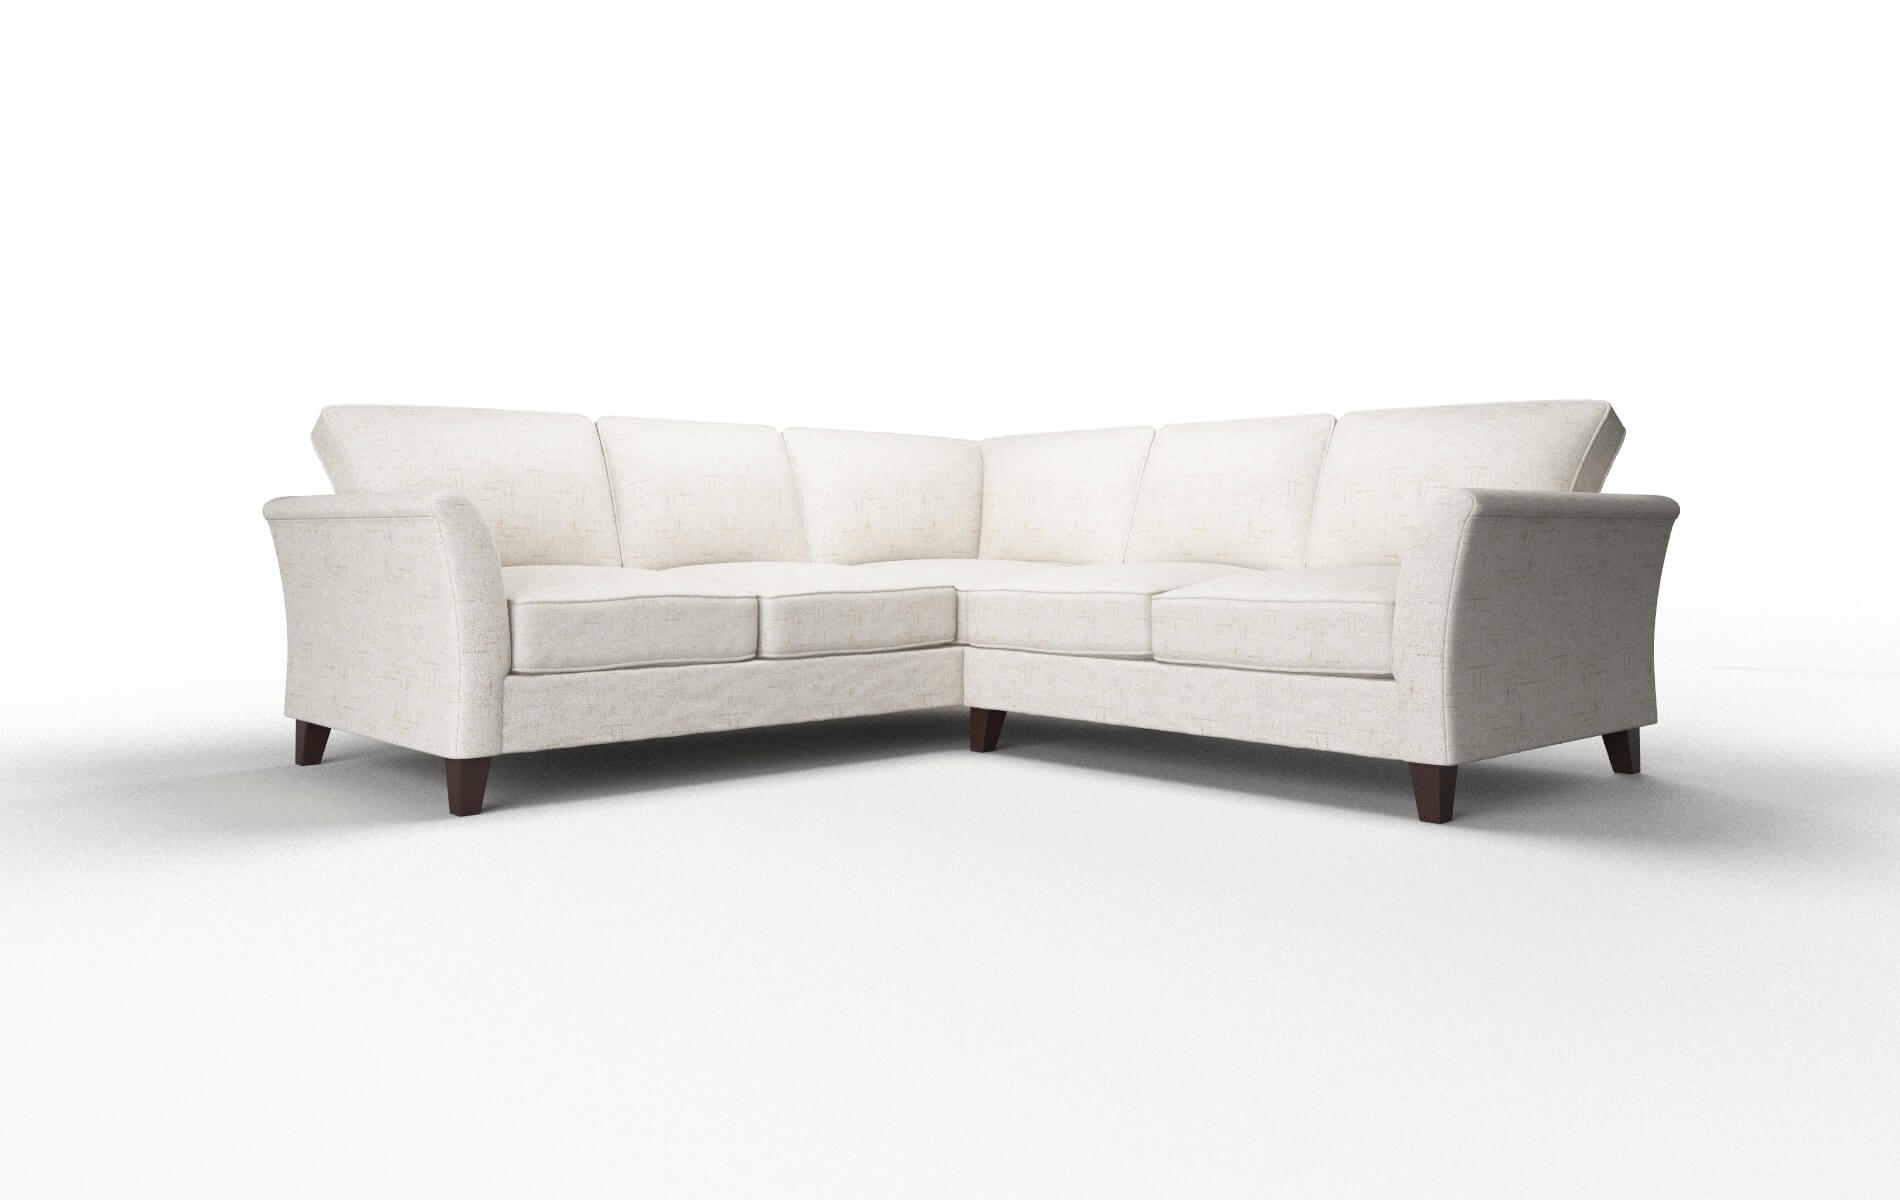 Cologne Oceanside Natural Sectional espresso legs